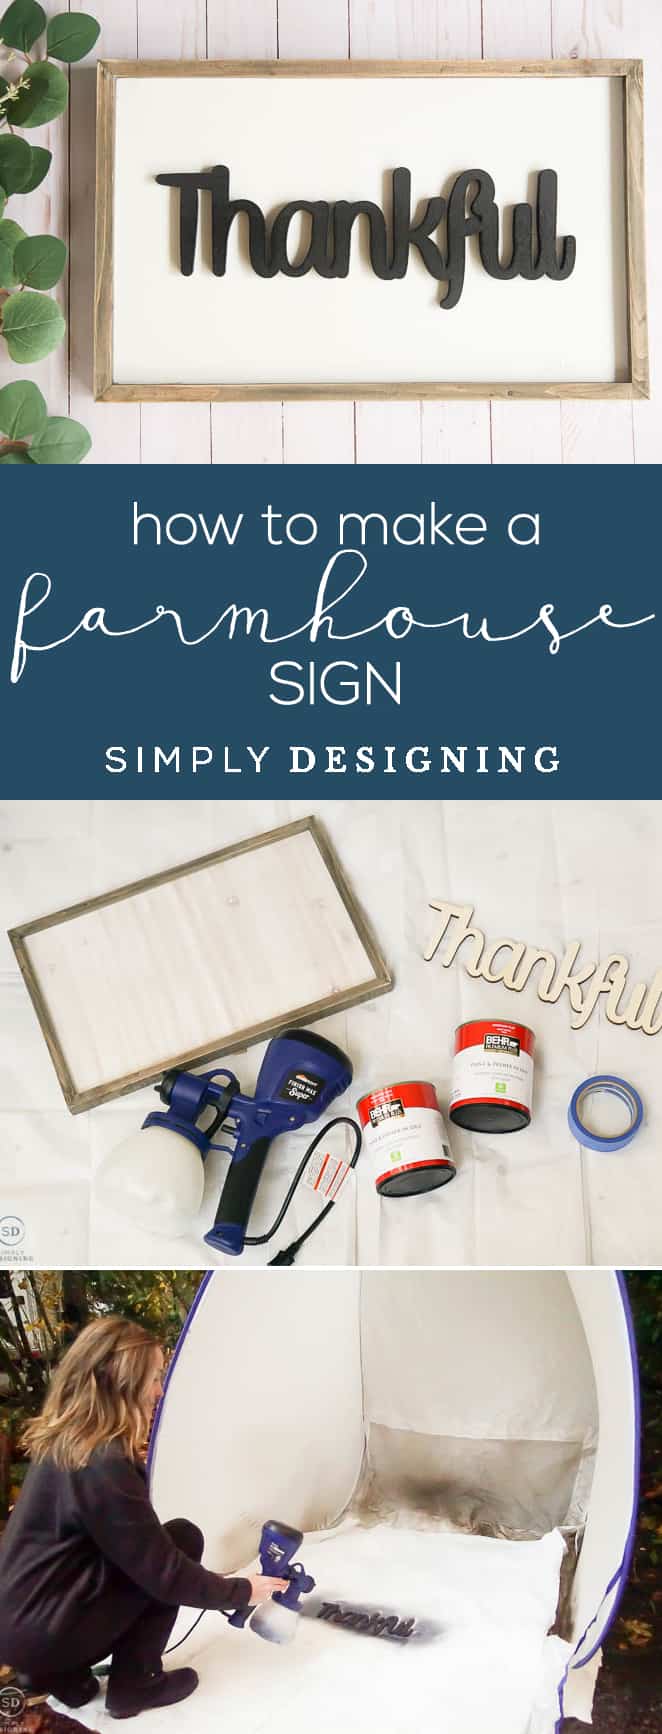 Save your time and money and make your own farmhouse sign instead of buying it with these tips for how to make a farmhouse sign